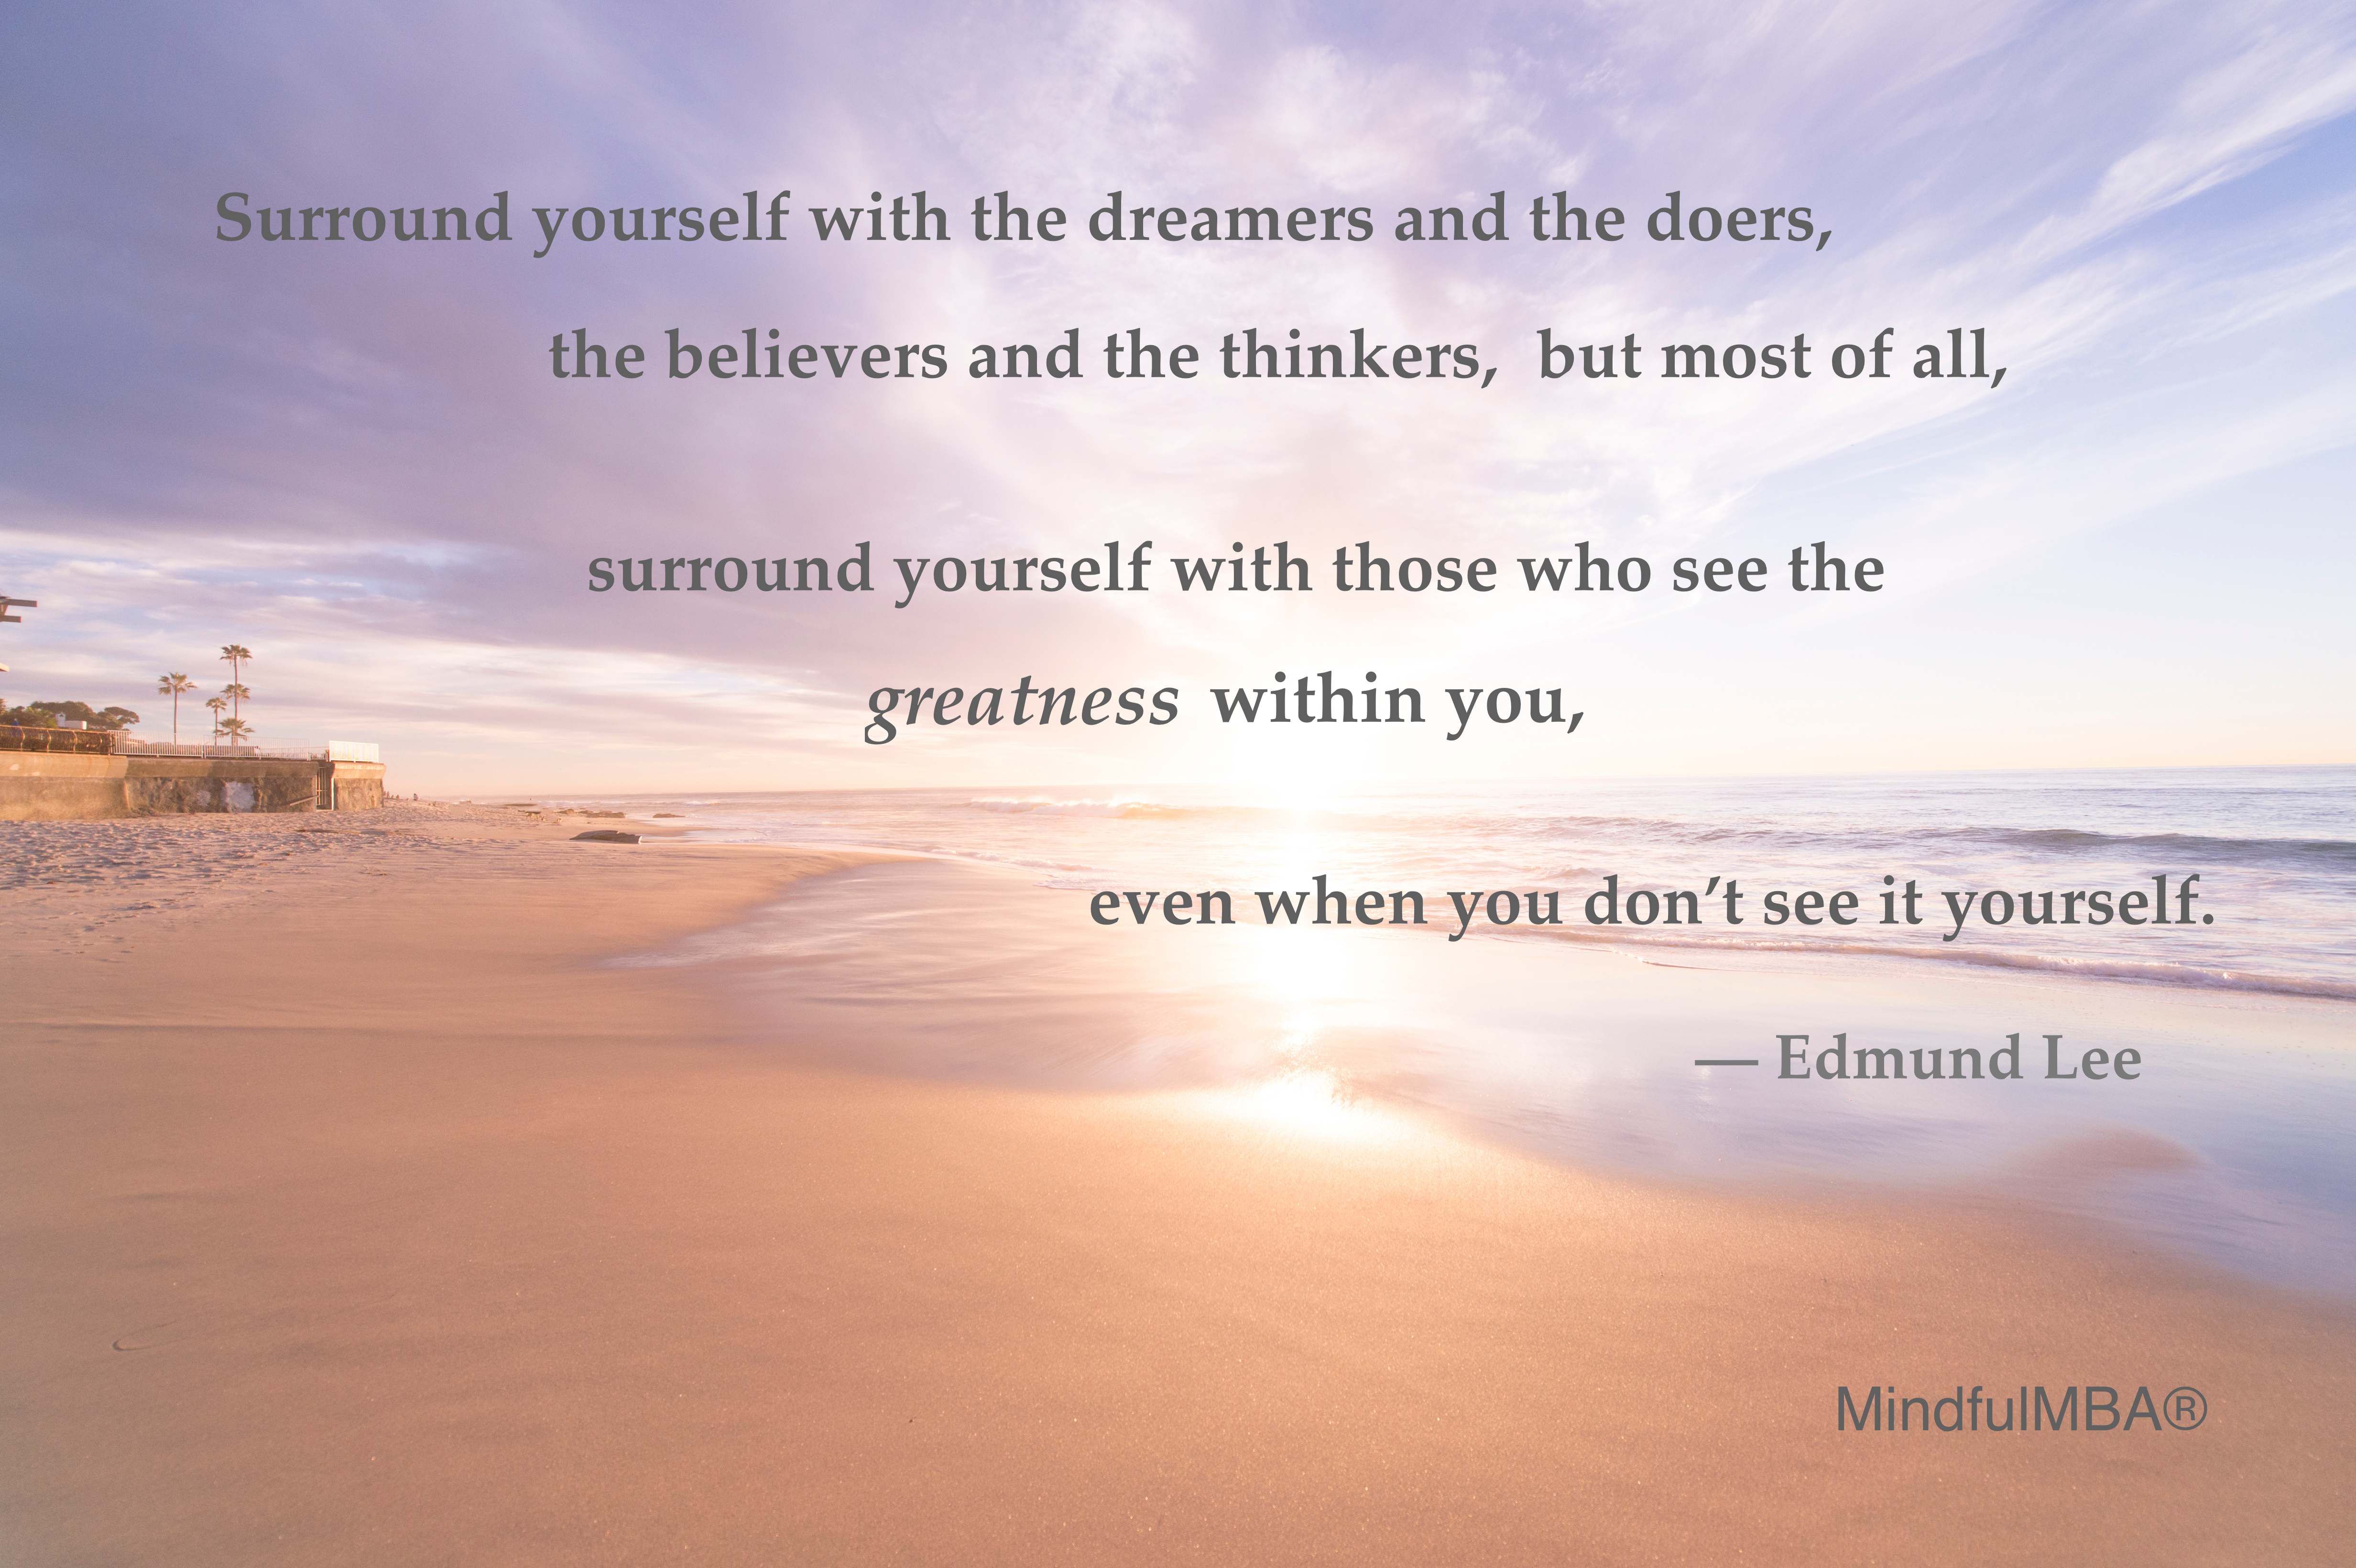 Edmund Lee_Surround Yourself quote w tag